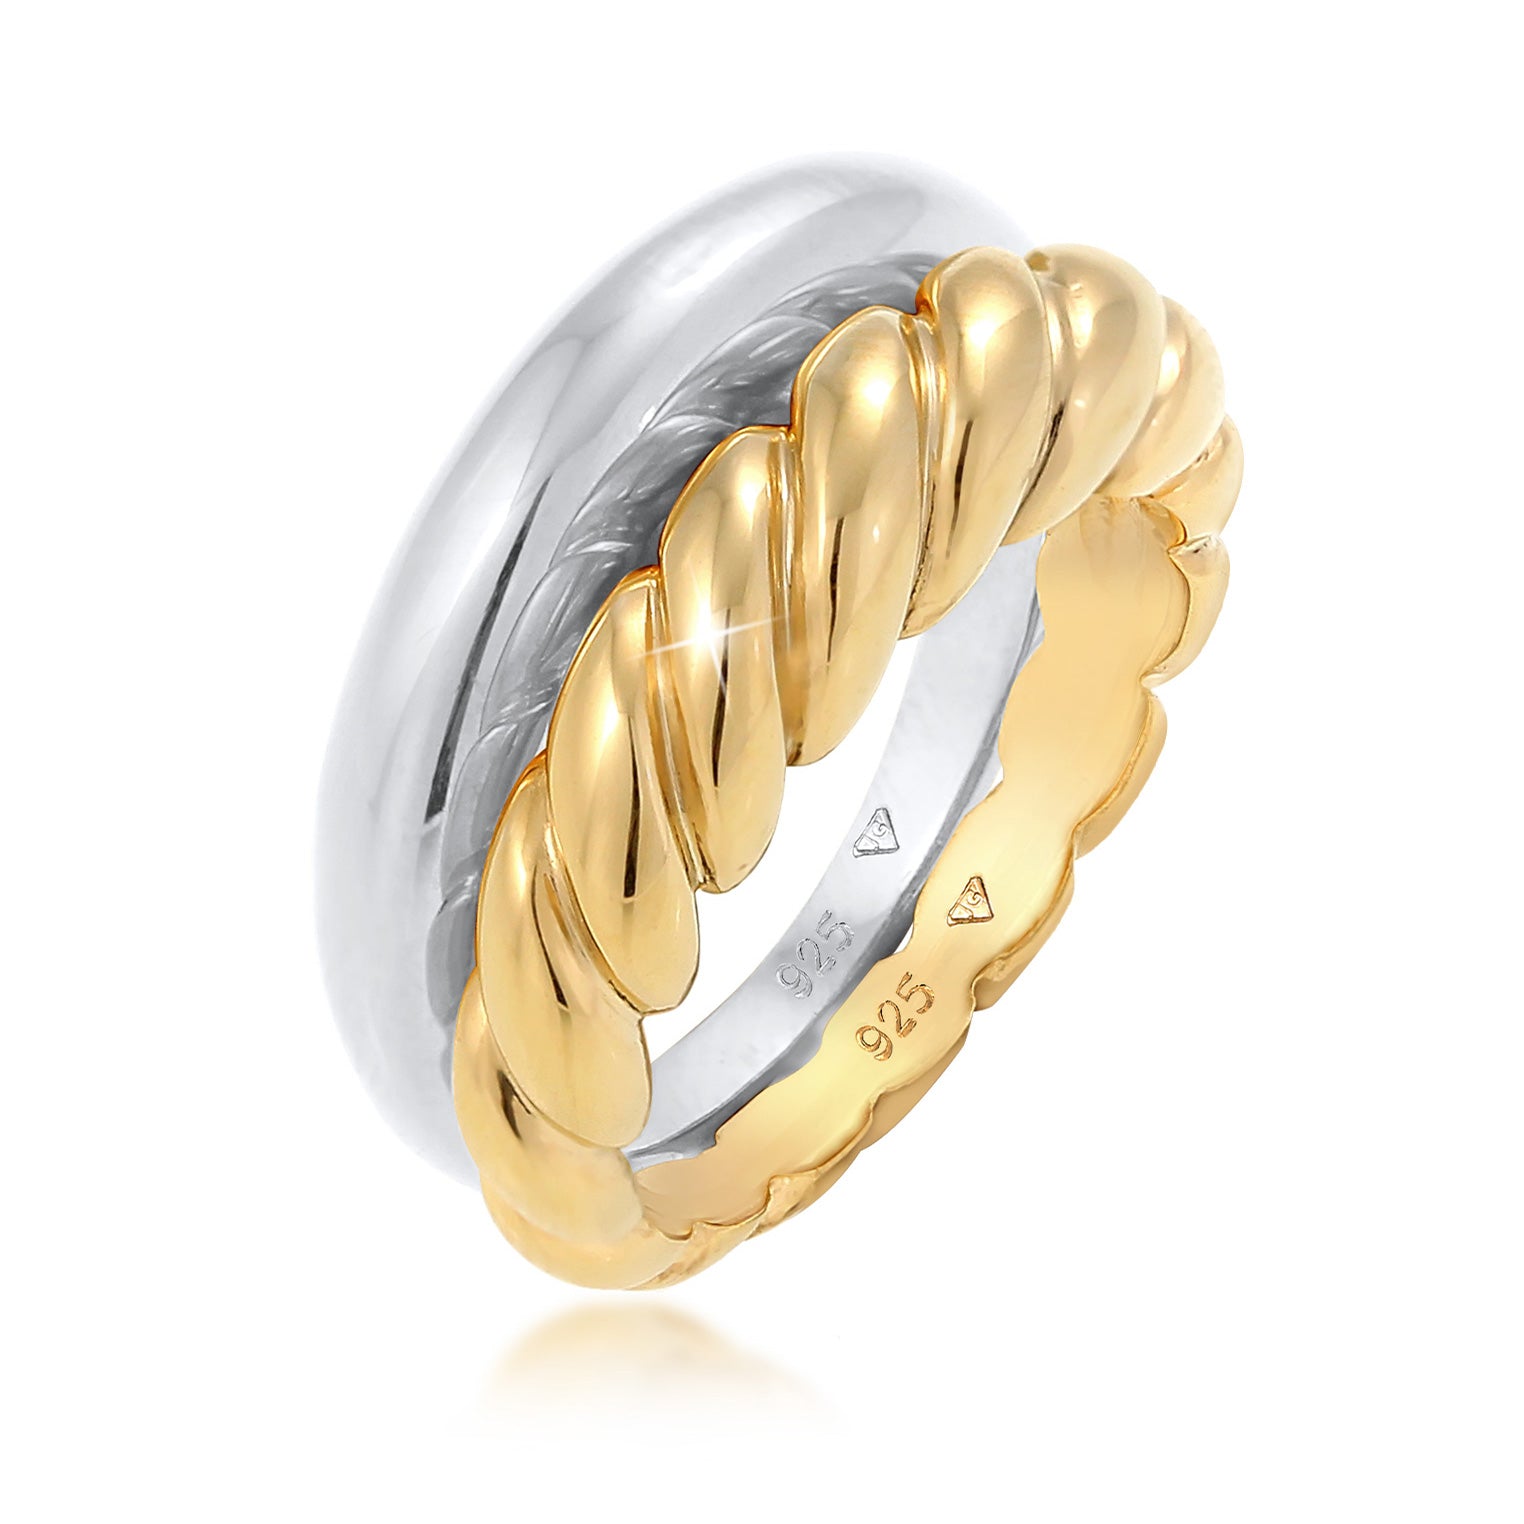 Rings made of silver or gold, buy from Elli